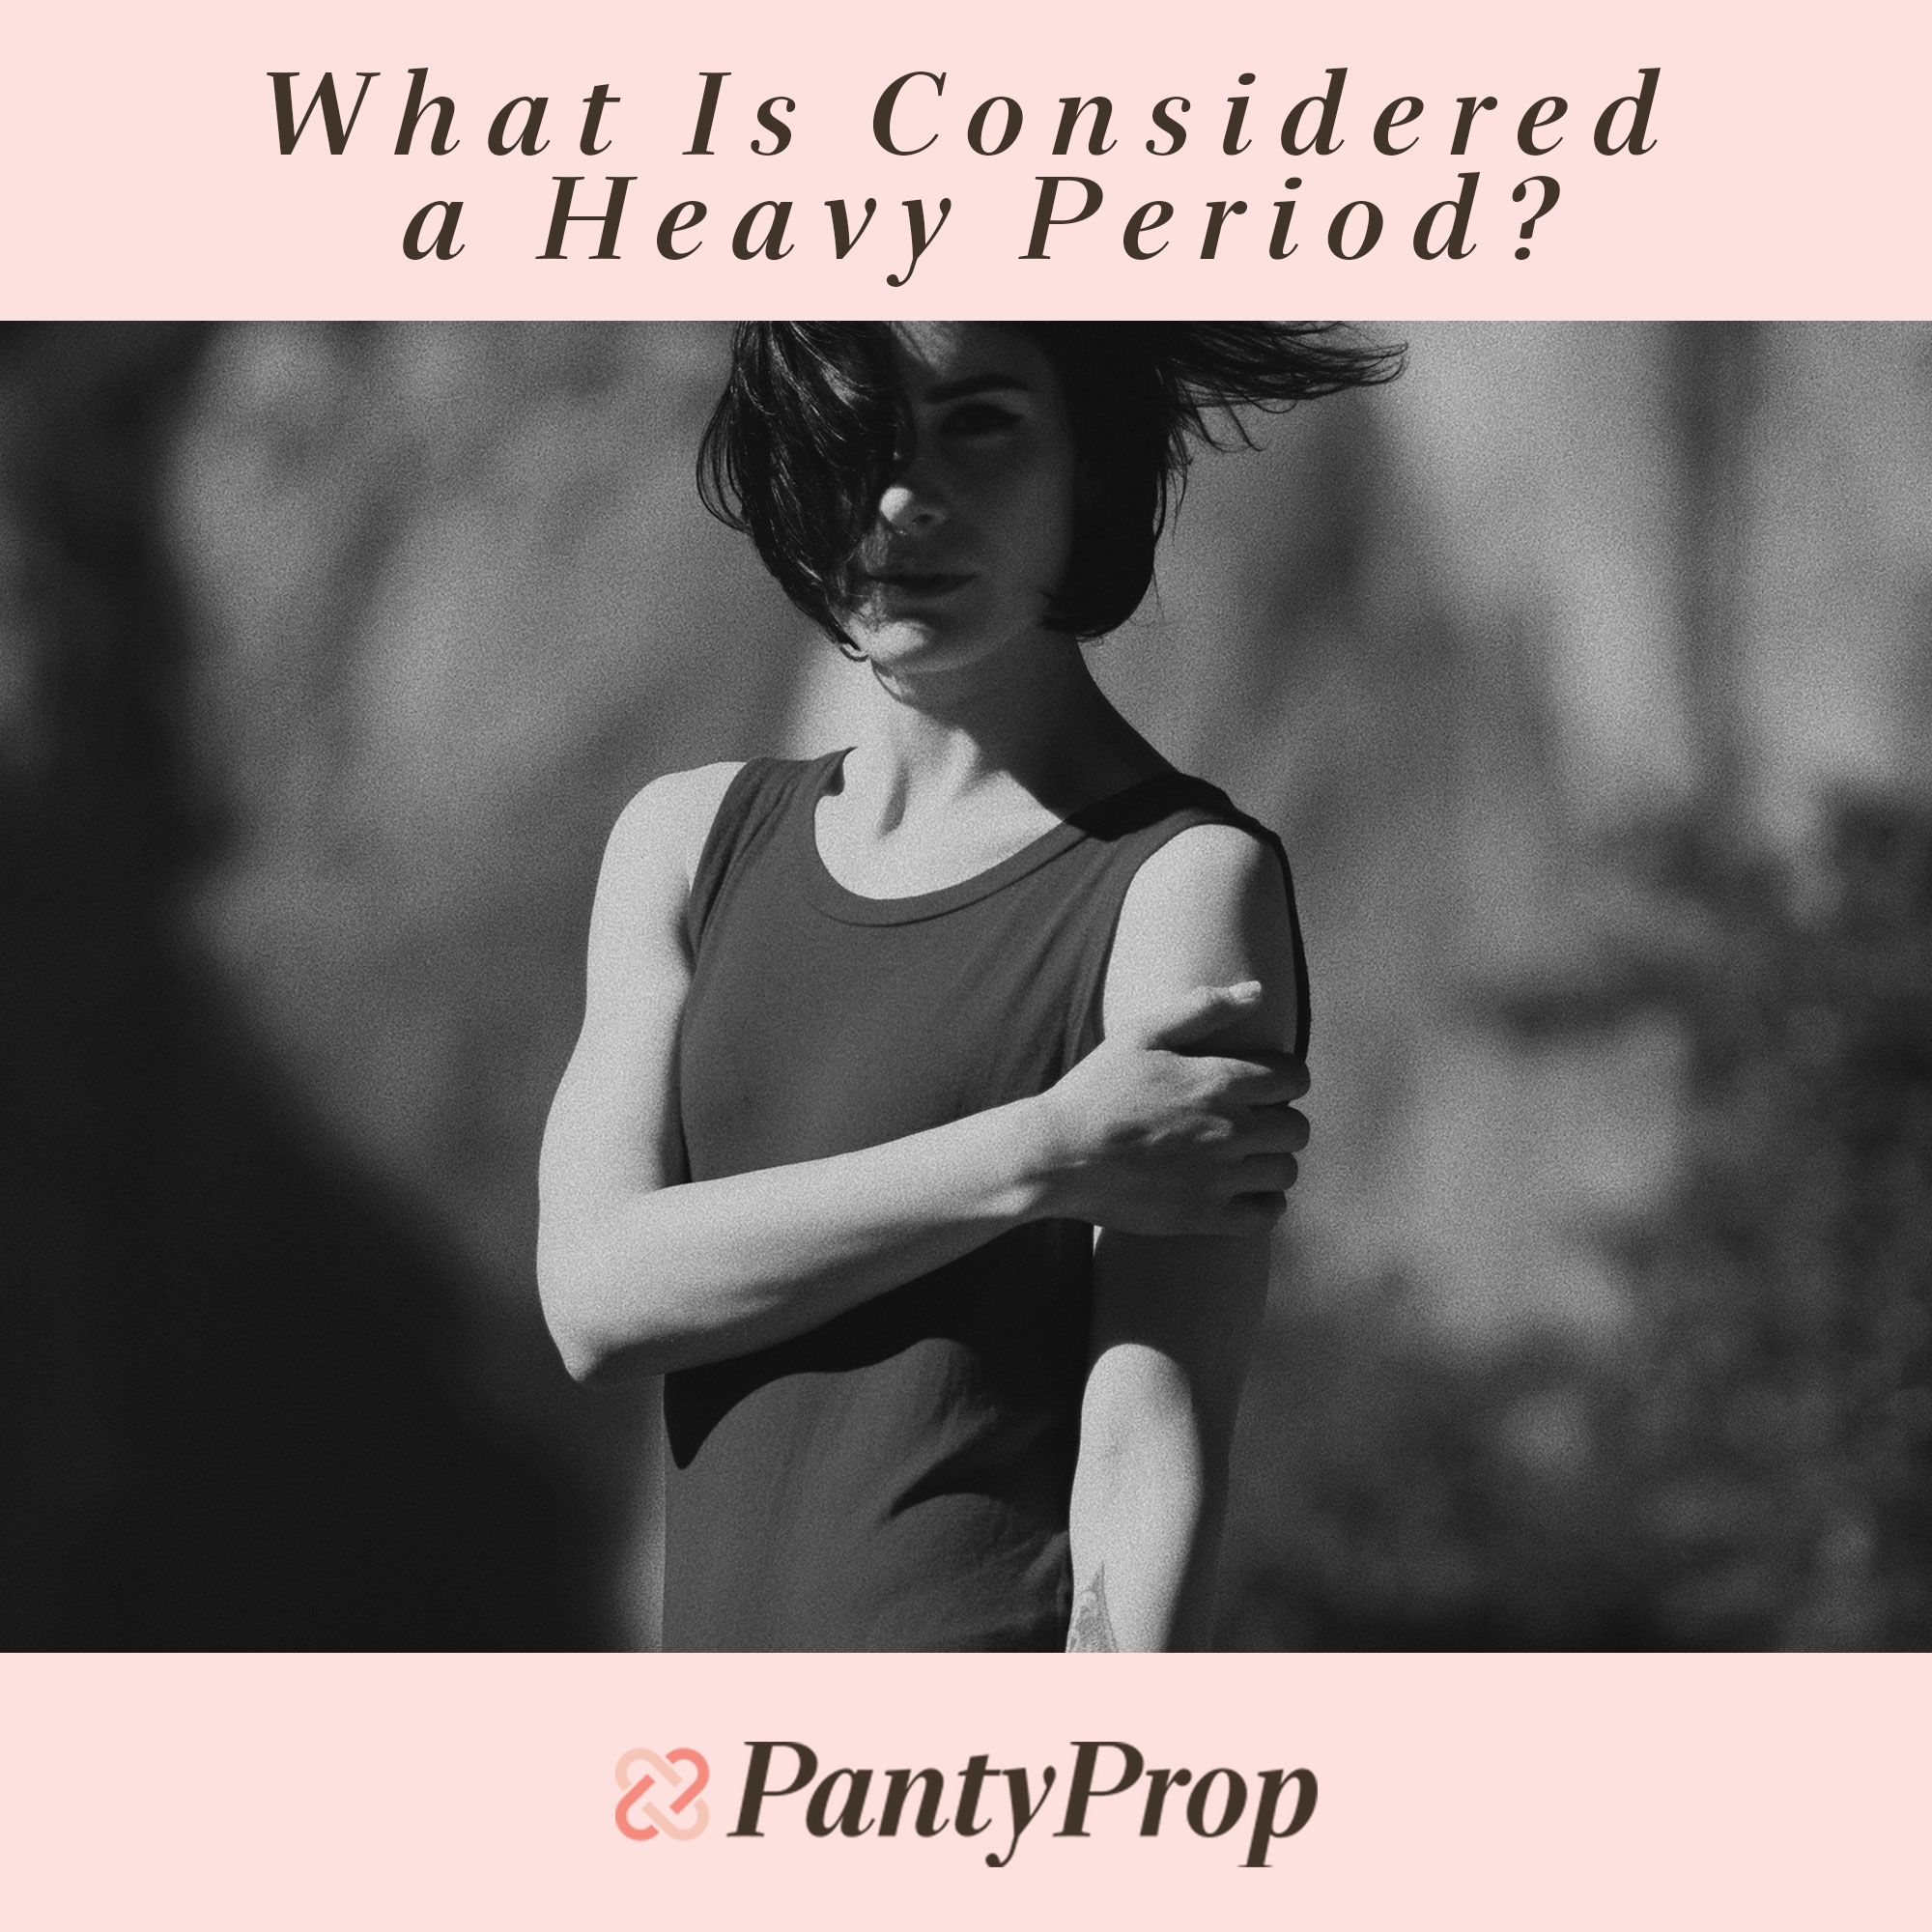 What Is Considered a Heavy Period?